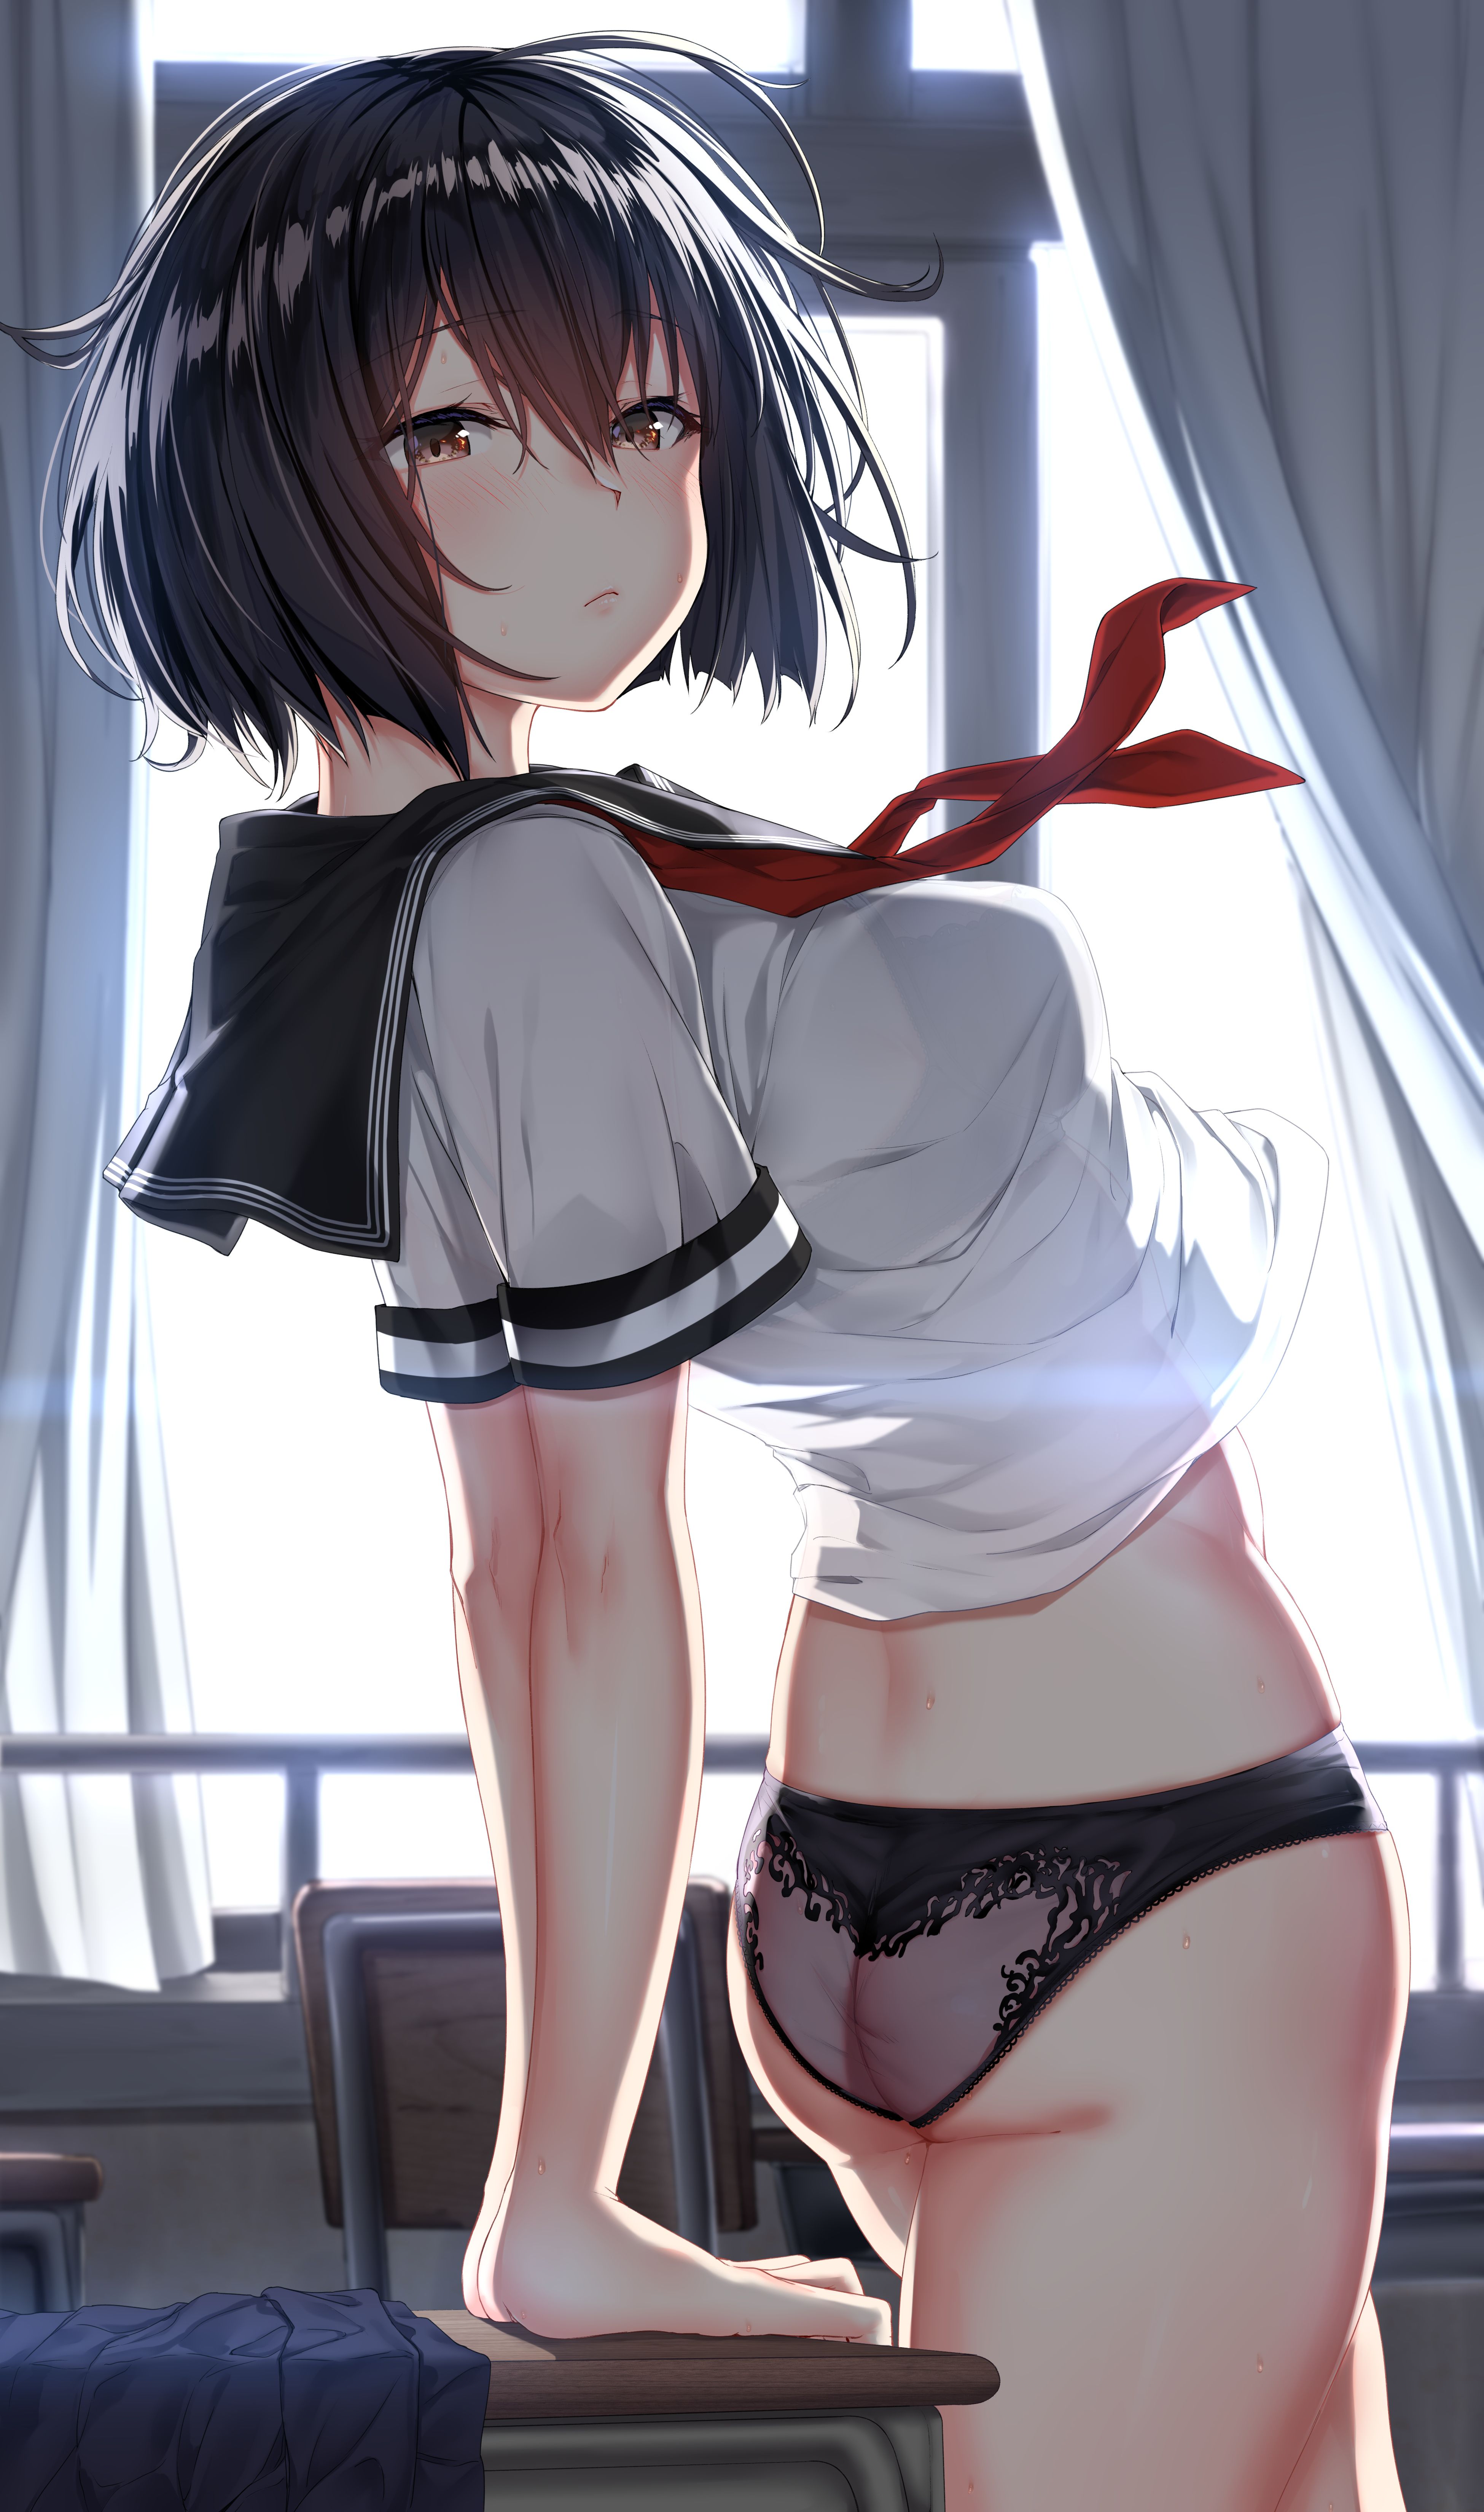 Erotic anime summary Erotic image collection of beautiful girls and beautiful girls with full pants because there is no skirt [50 pieces] 29